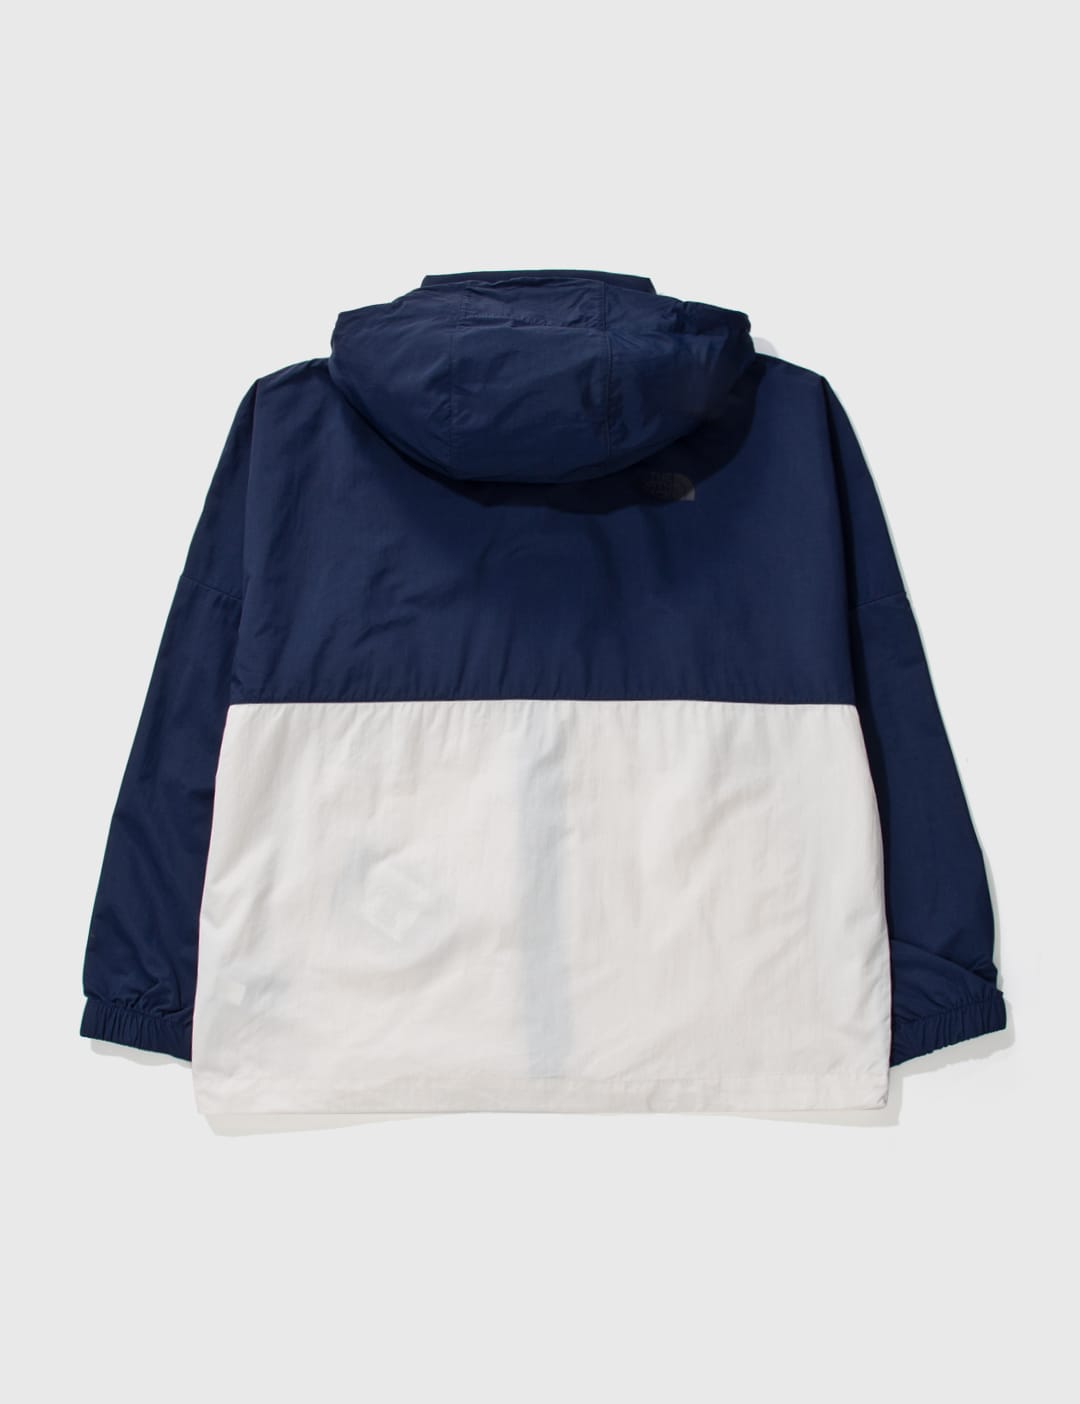 The North Face - Novelty Wind Jacket | HBX - Globally Curated